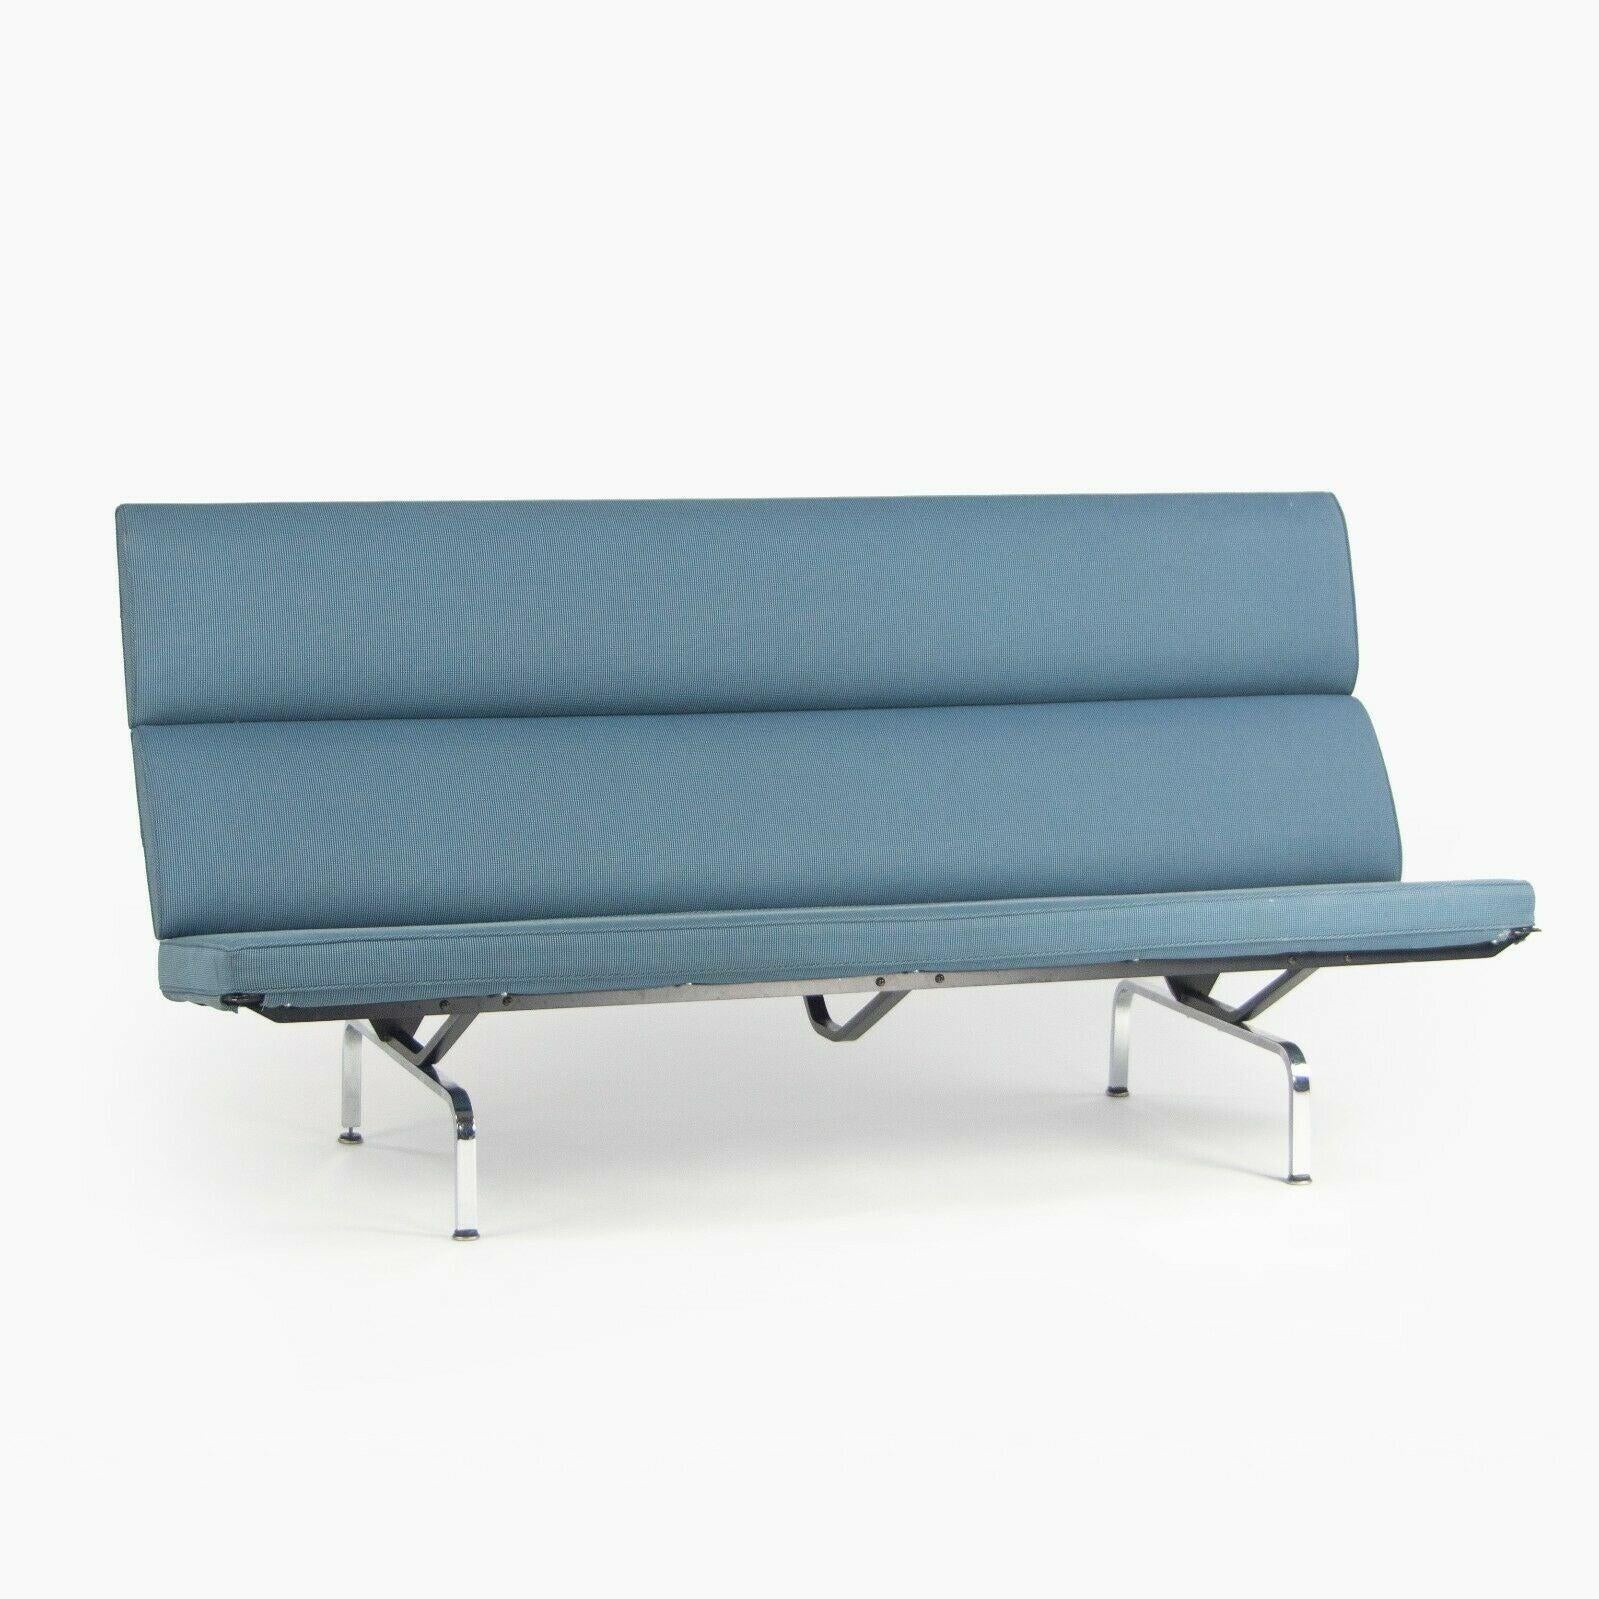 Listed for sale is an original Herman Miller Eames Sofa Compact designed by Ray and Charles Eames. The sofa compact was designed to be as efficient as possible when shipping and was therefore designed to fold almost flat. This example is in very